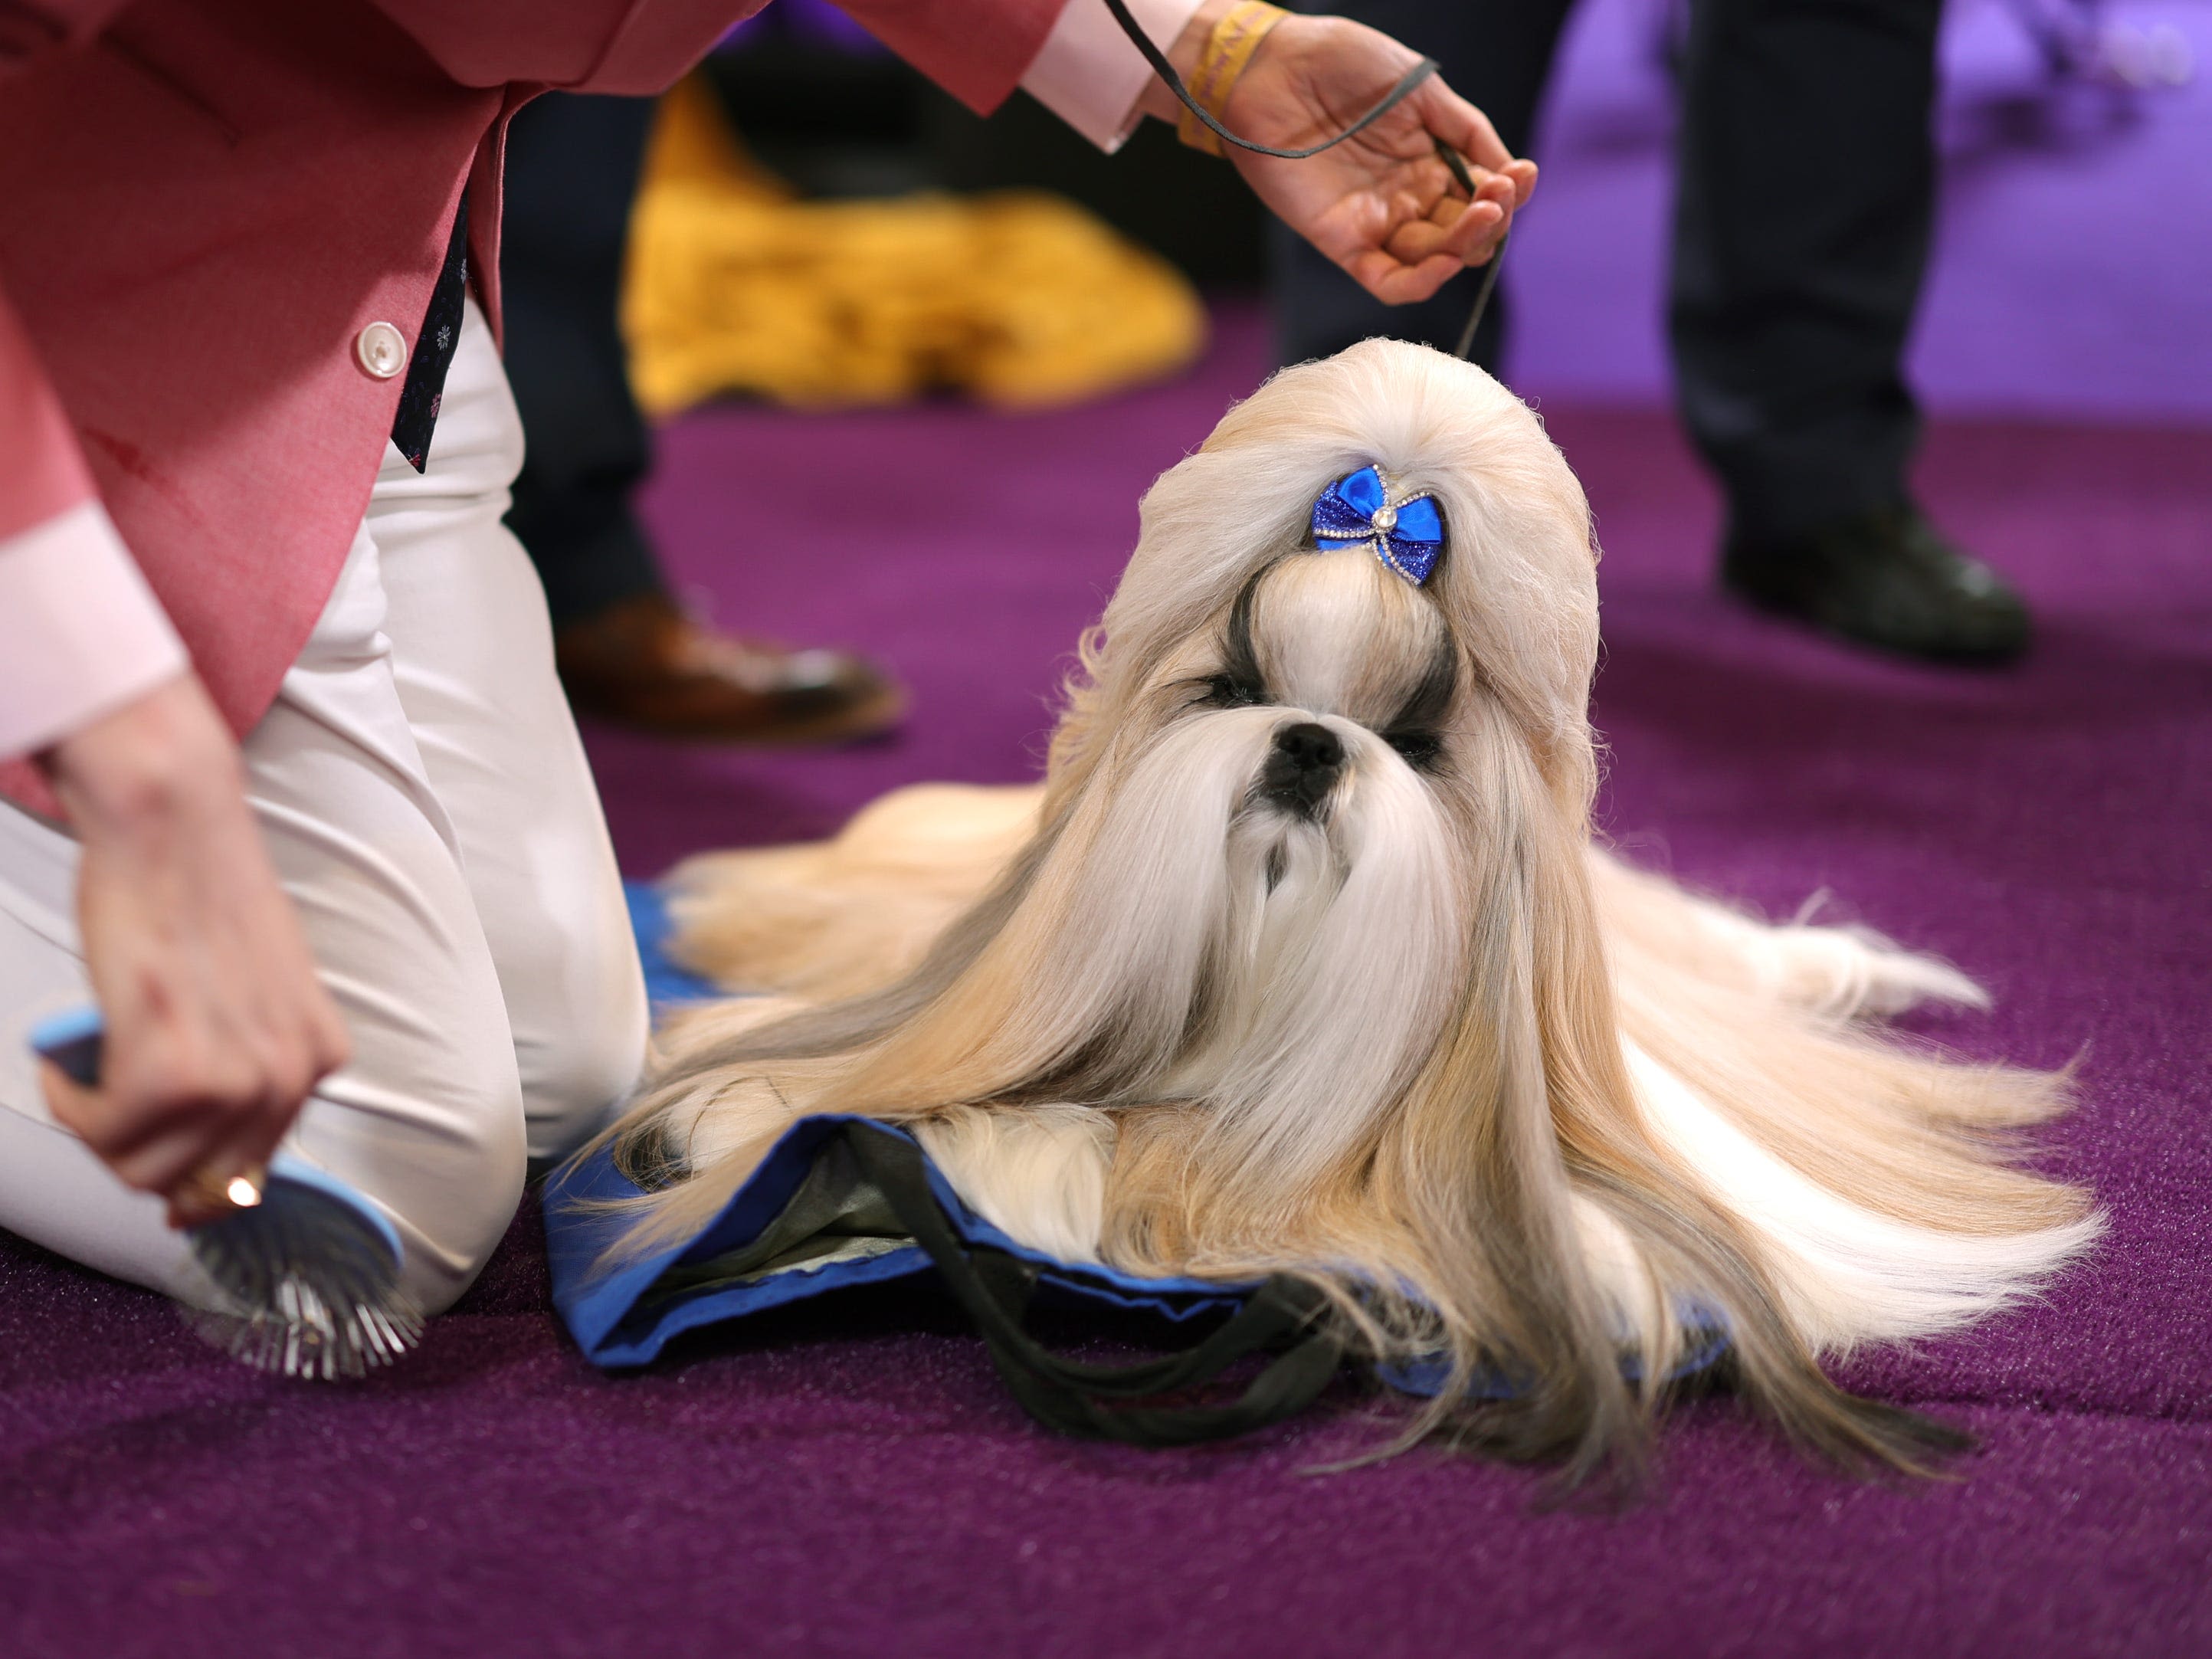 You need to see the 7 prize winners at this year's Westminster dog show